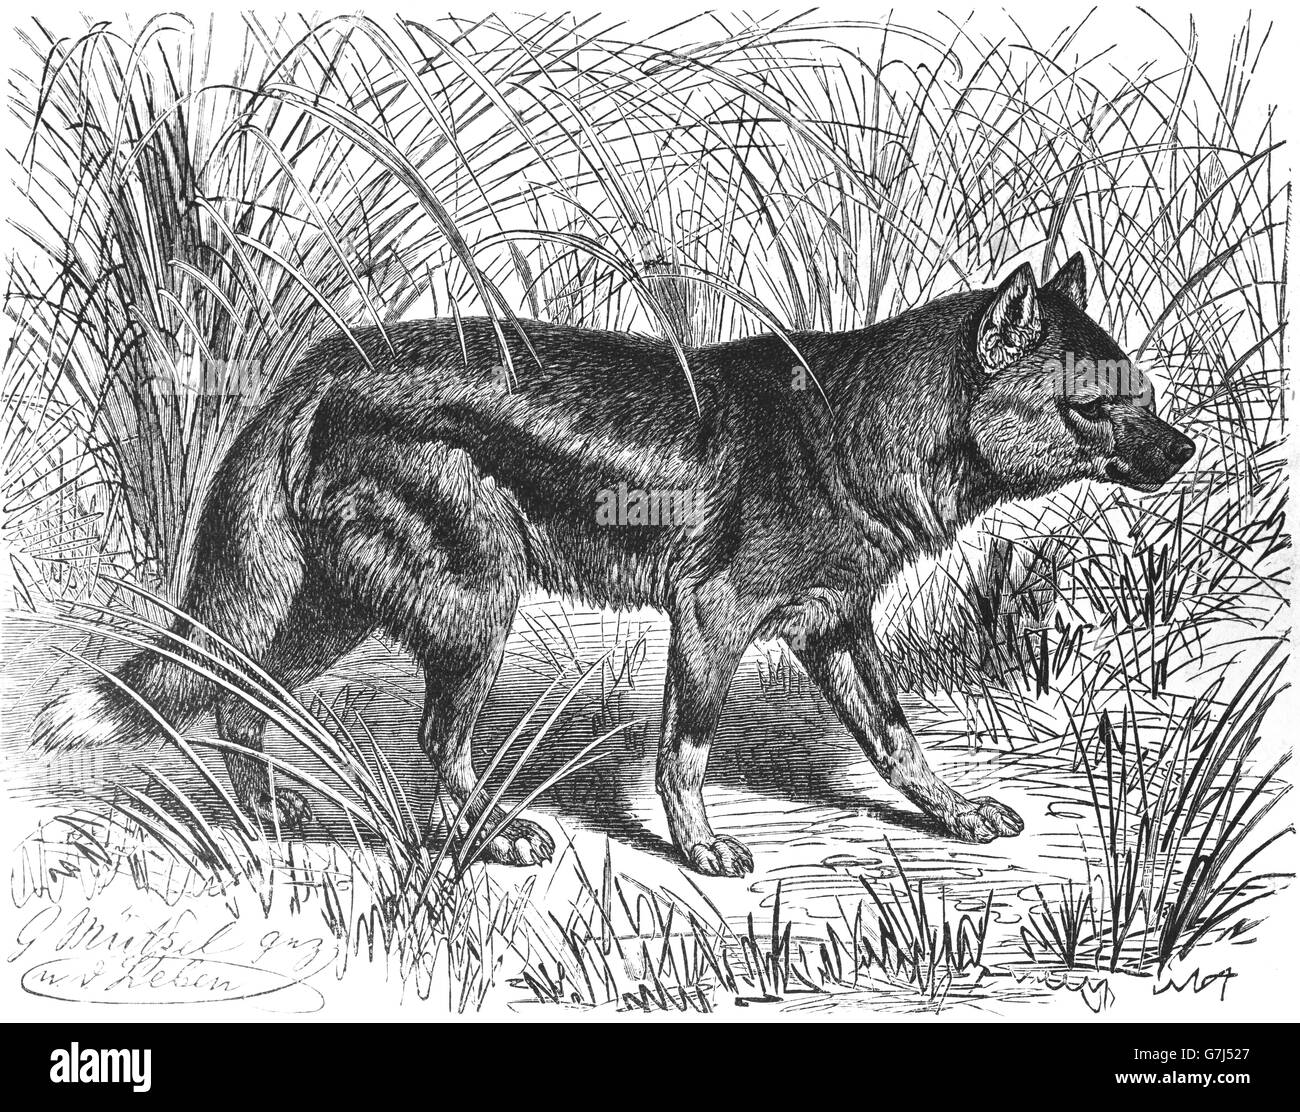 Side-striped jackal, Canis adustus, Caninae, illustration from book dated 1904 Stock Photo